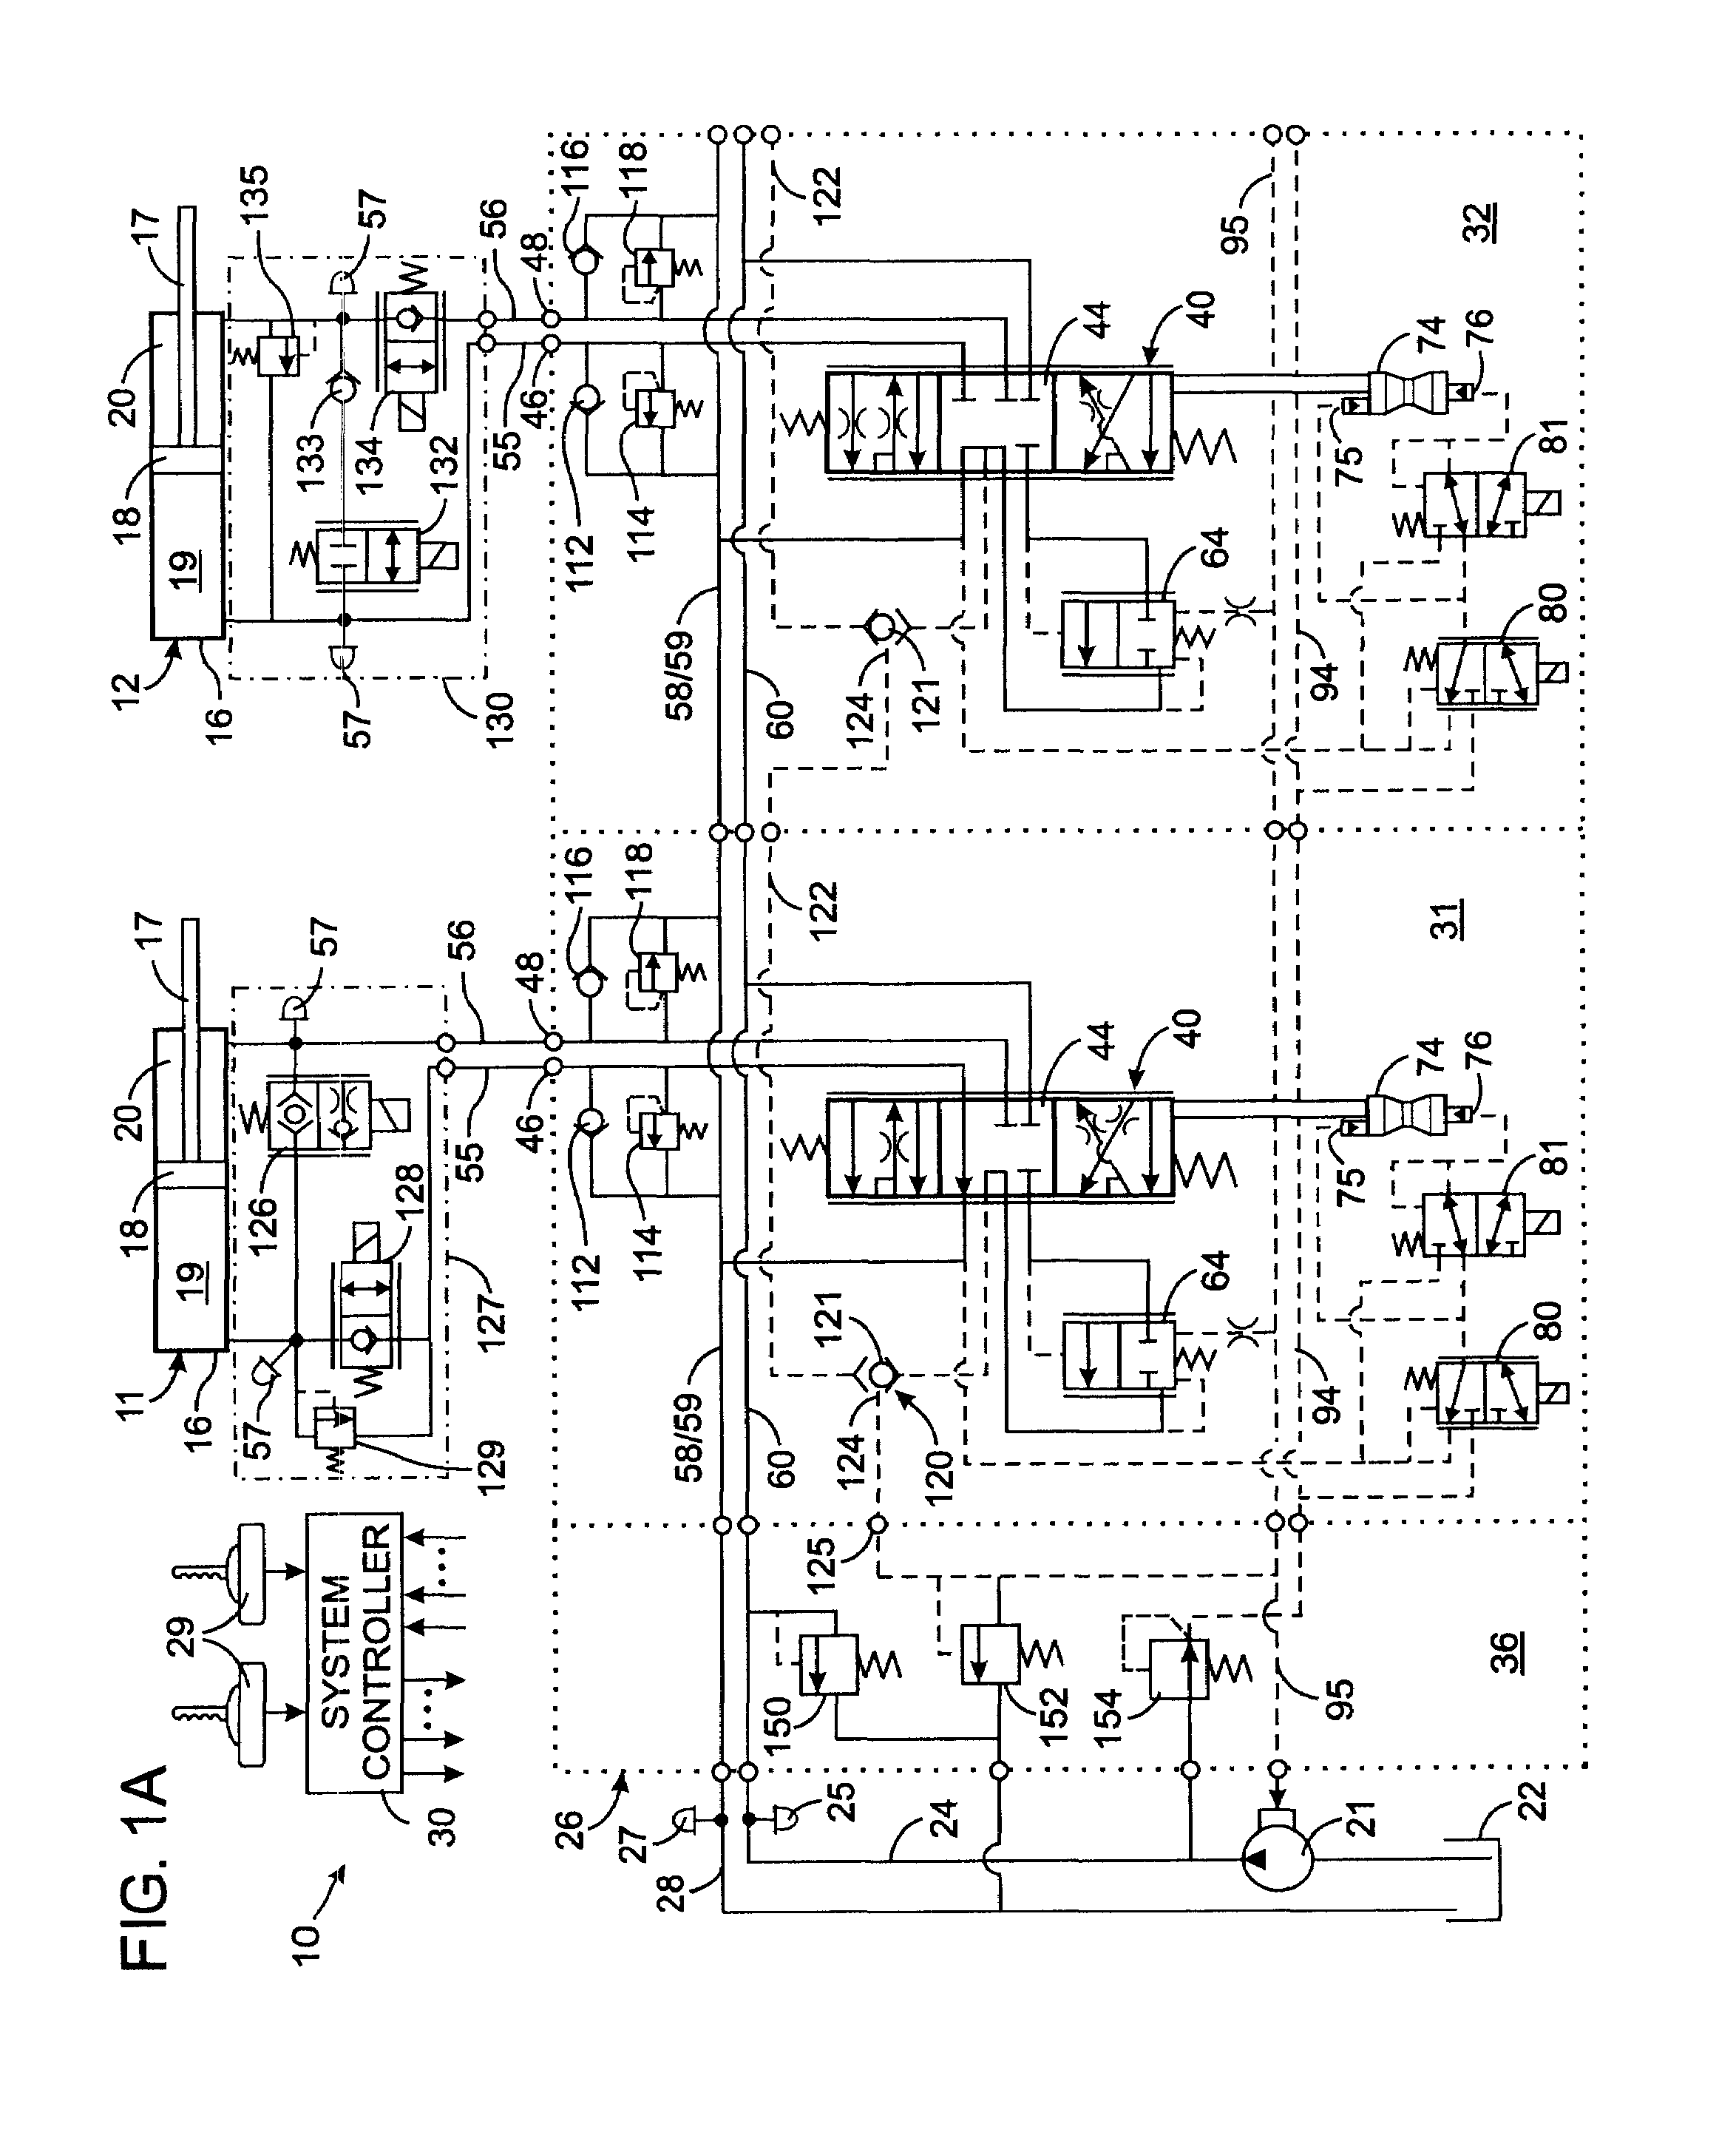 Hydraulic valve assembly with a pressure compensated directional spool valve and a regeneration shunt valve